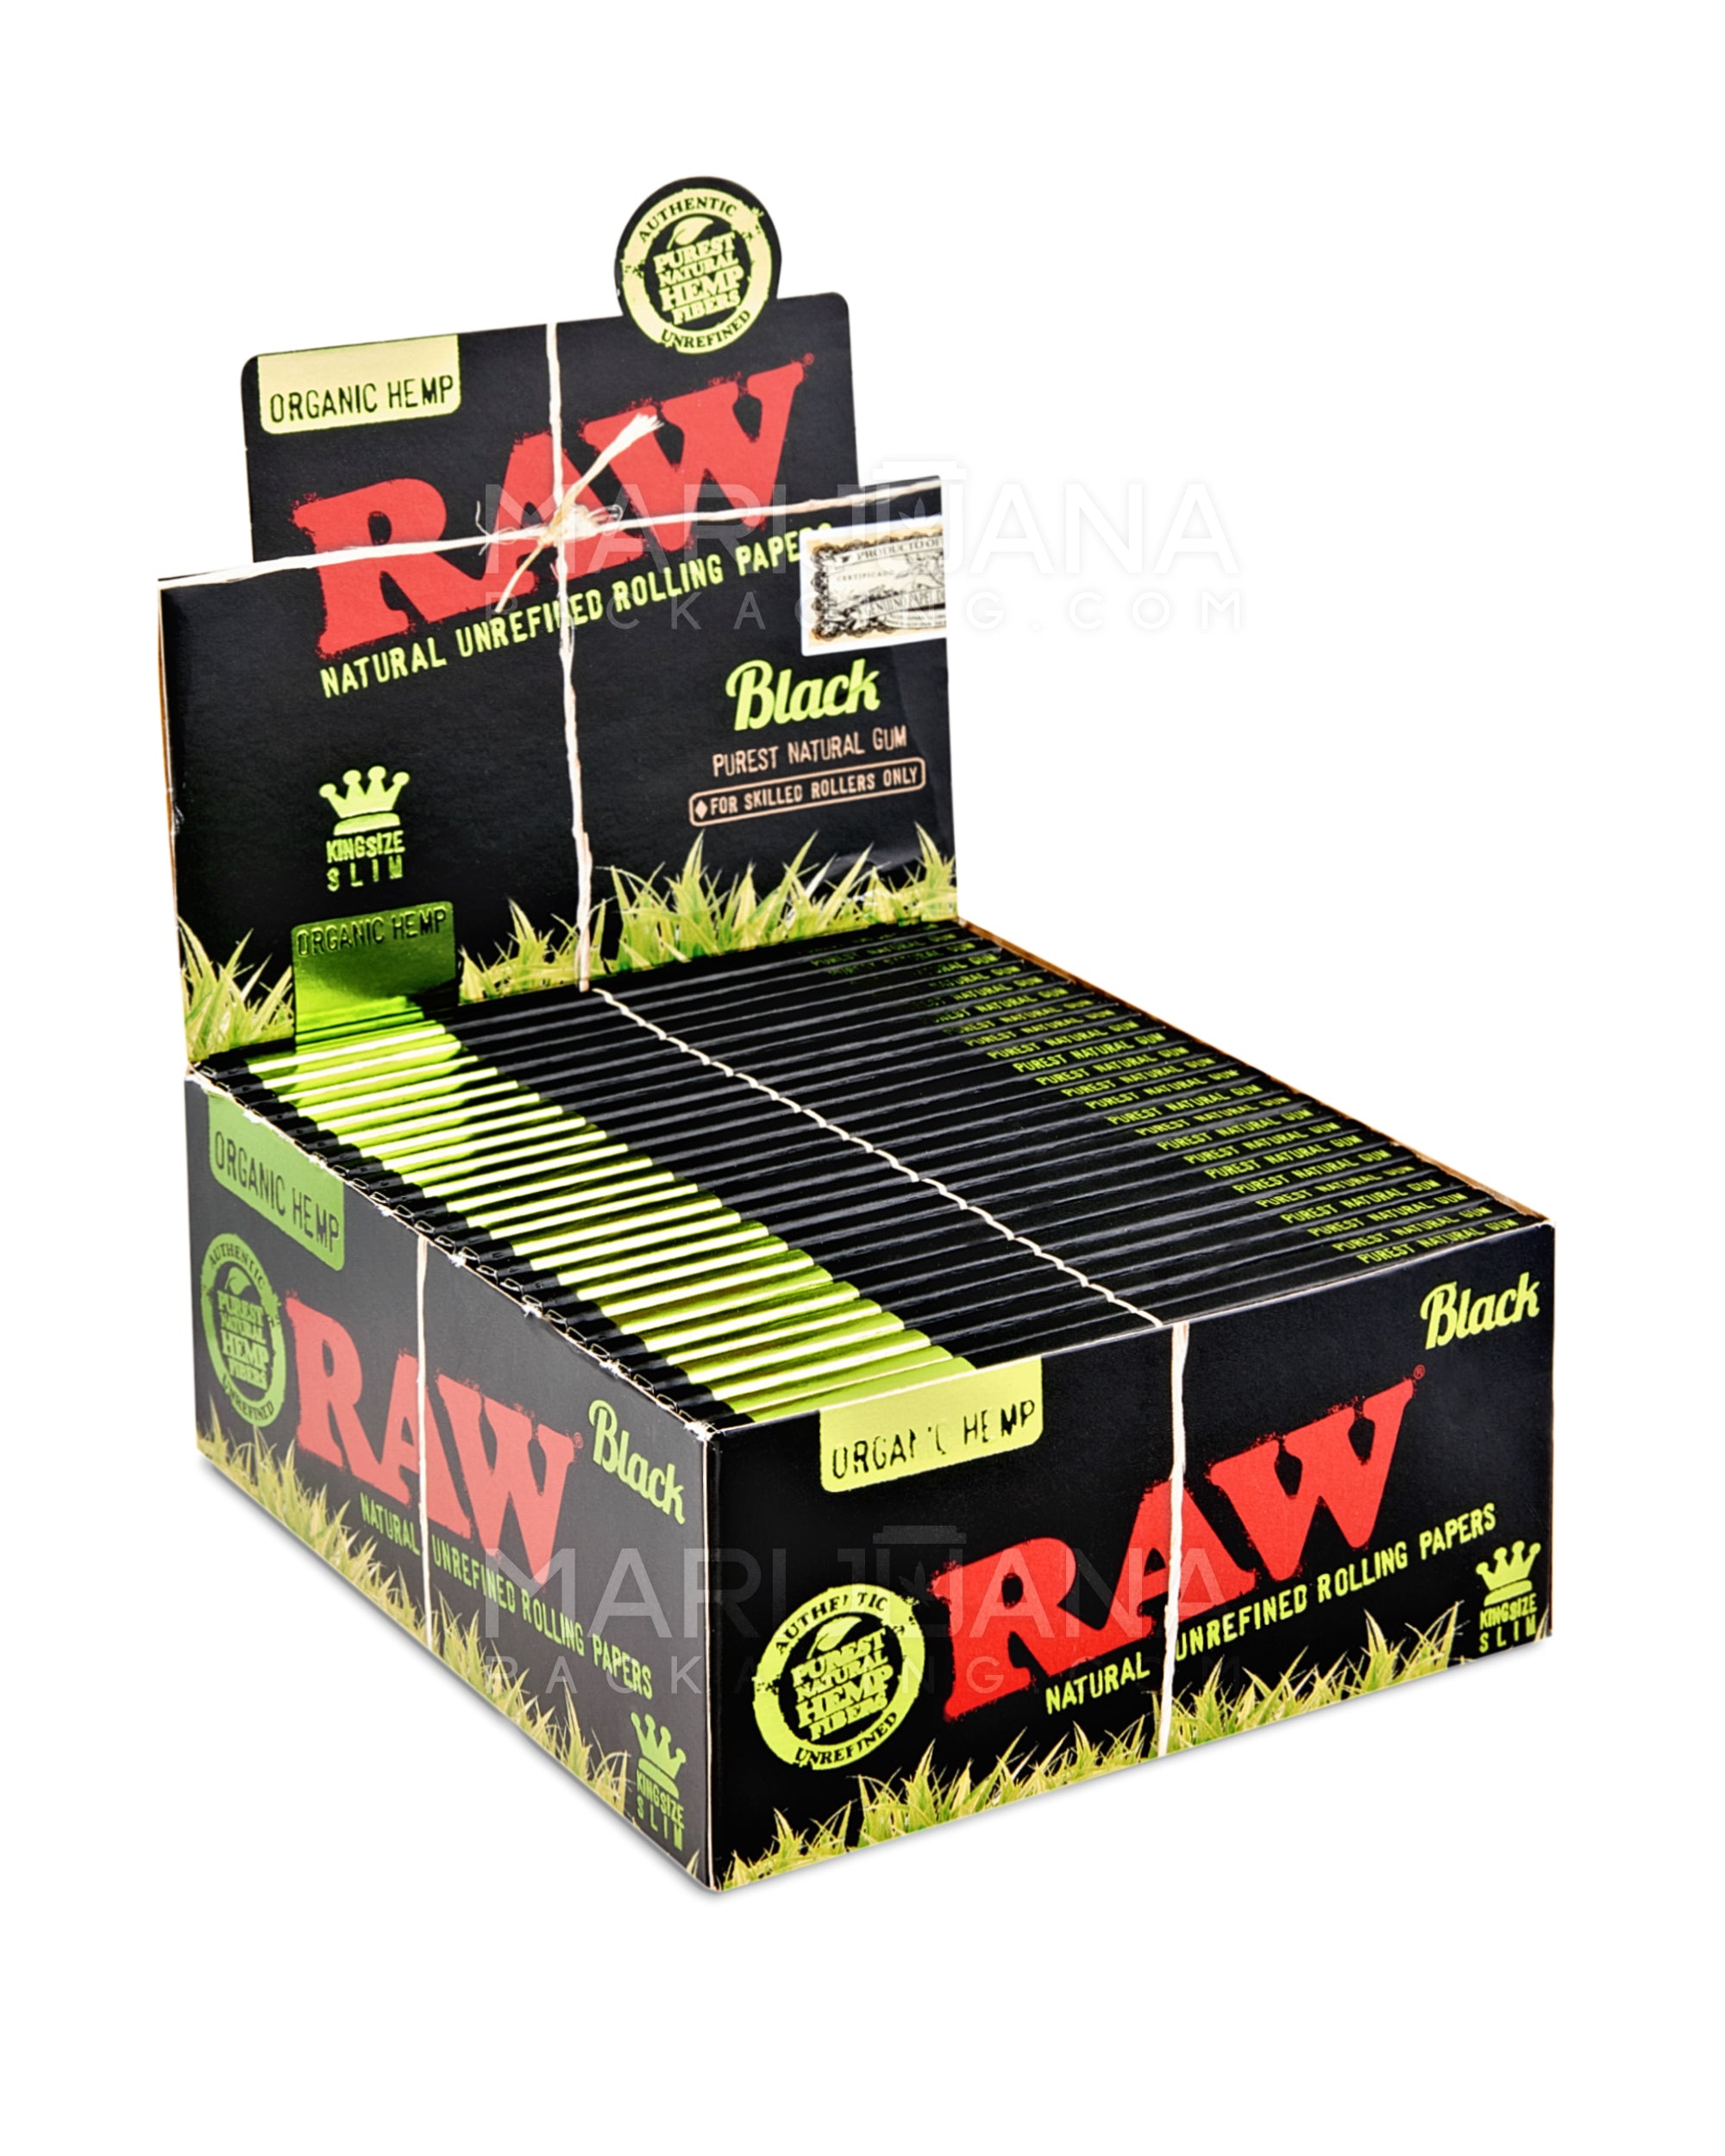 RAW | 'Retail Display' King Size Black Organic Hemp Rolling Papers | 109mm - Classic - 50 Count - 1